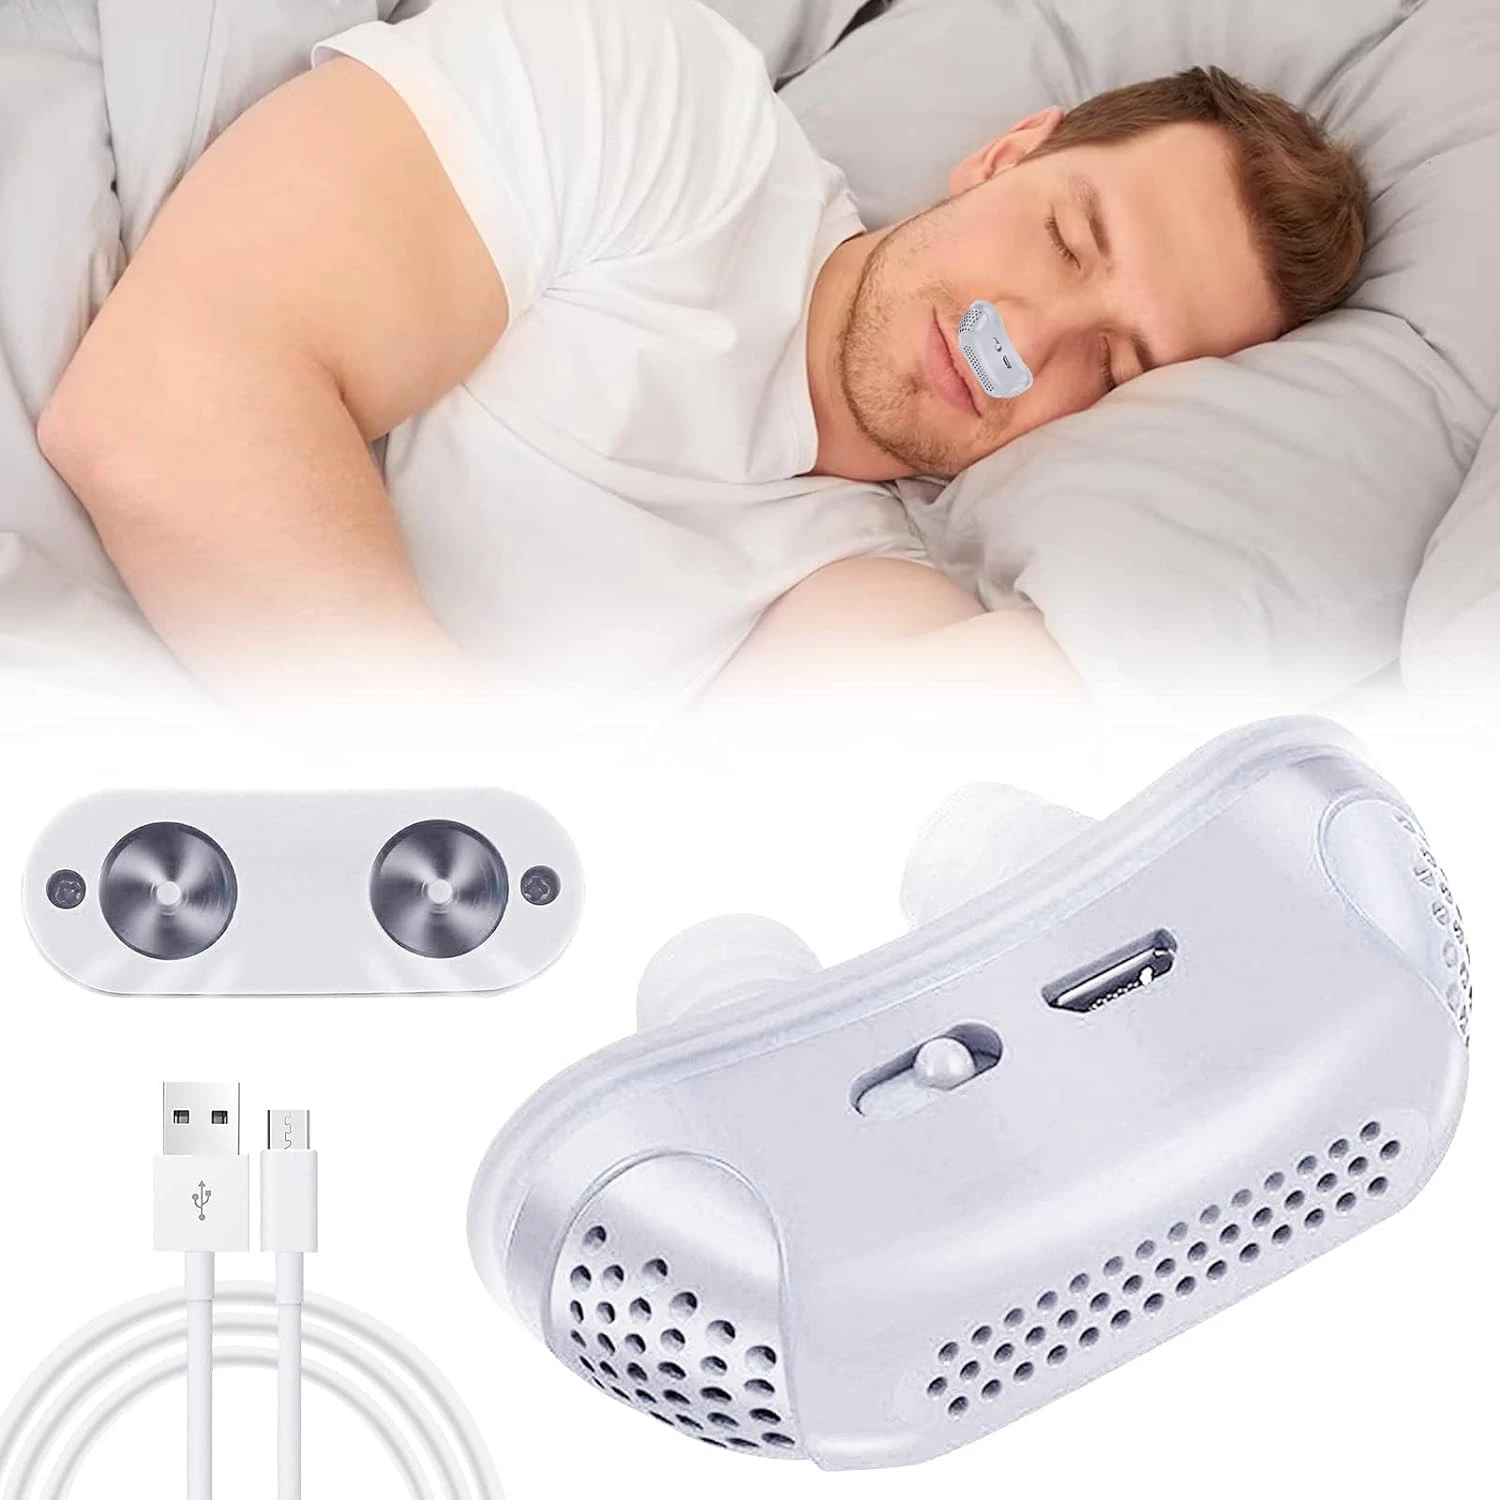 My Souq Store 3 in 1 Anti Snoring Device (Random Color) with Mini Fan, Anti Snoring Device, Variable Electric Solution to Stop Snoring, Mini Sleep Aid for Clogged Nostrils - B0CSKSFWHQ